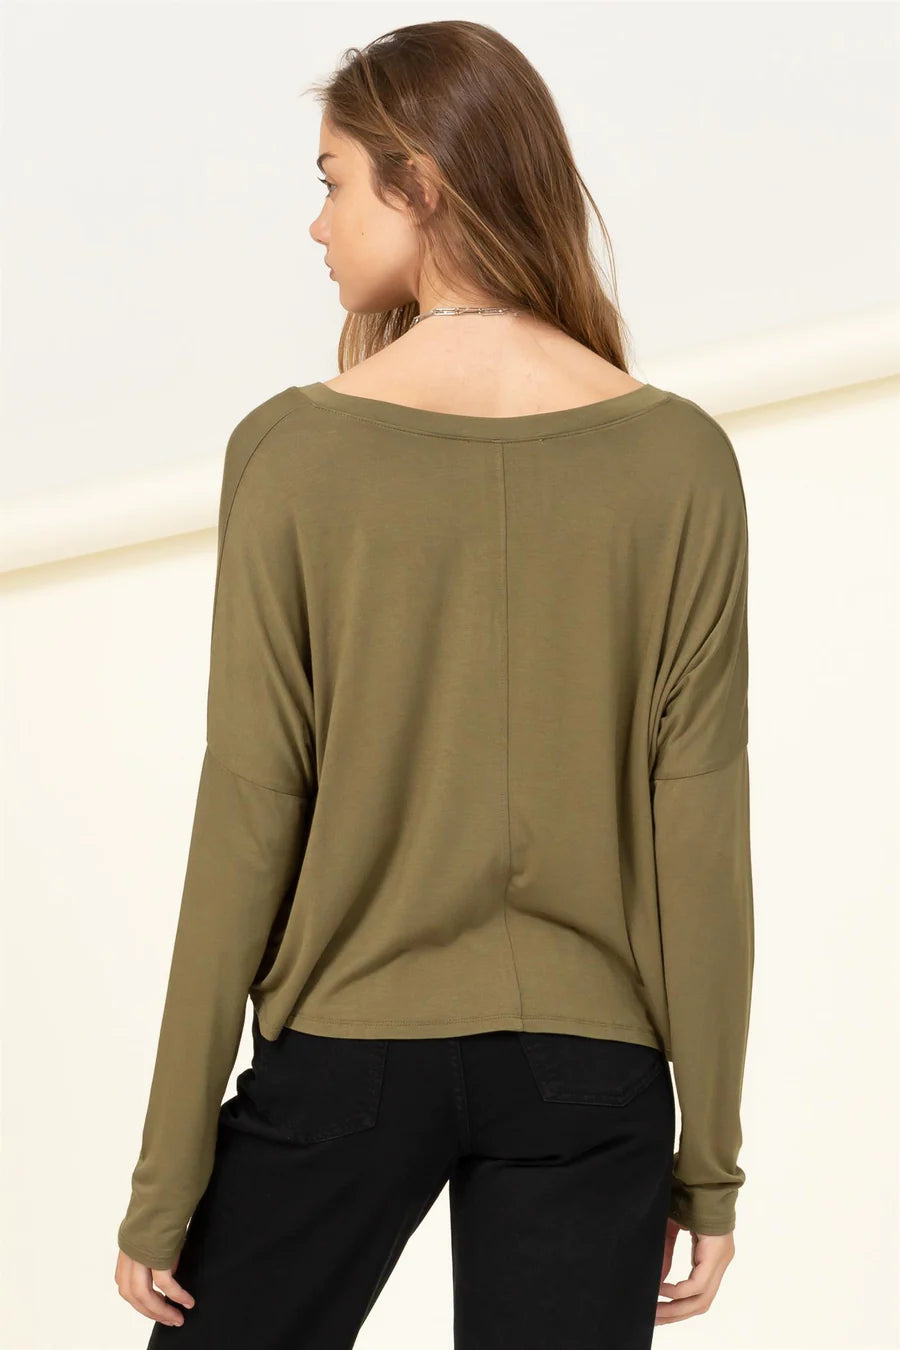 The back view of a woman wearing a HYFVE Olive Love Me Right V Neck Loose Fit Top.